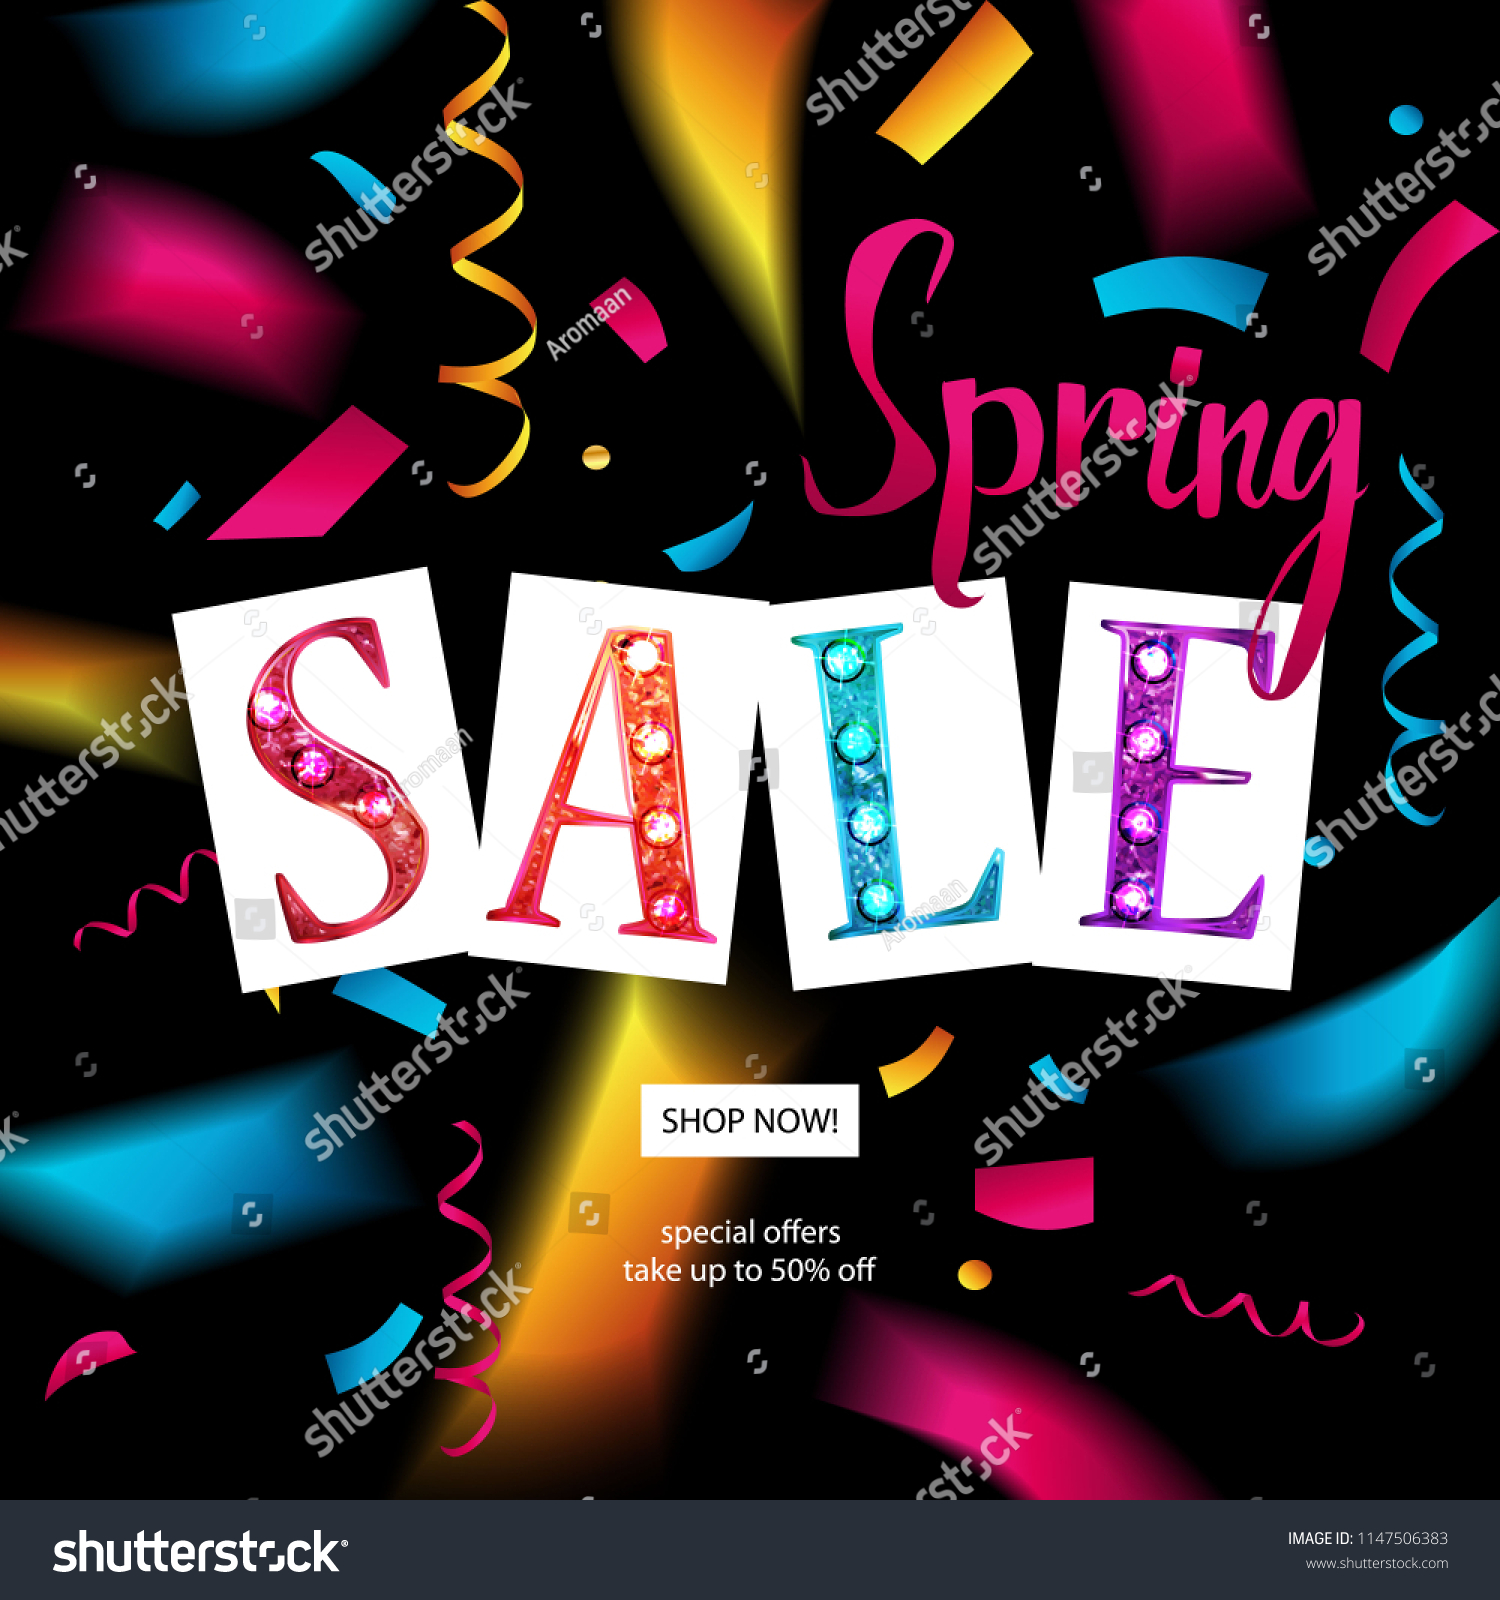 Spring sale banner template design. For your online store. Raster copy #1147506383